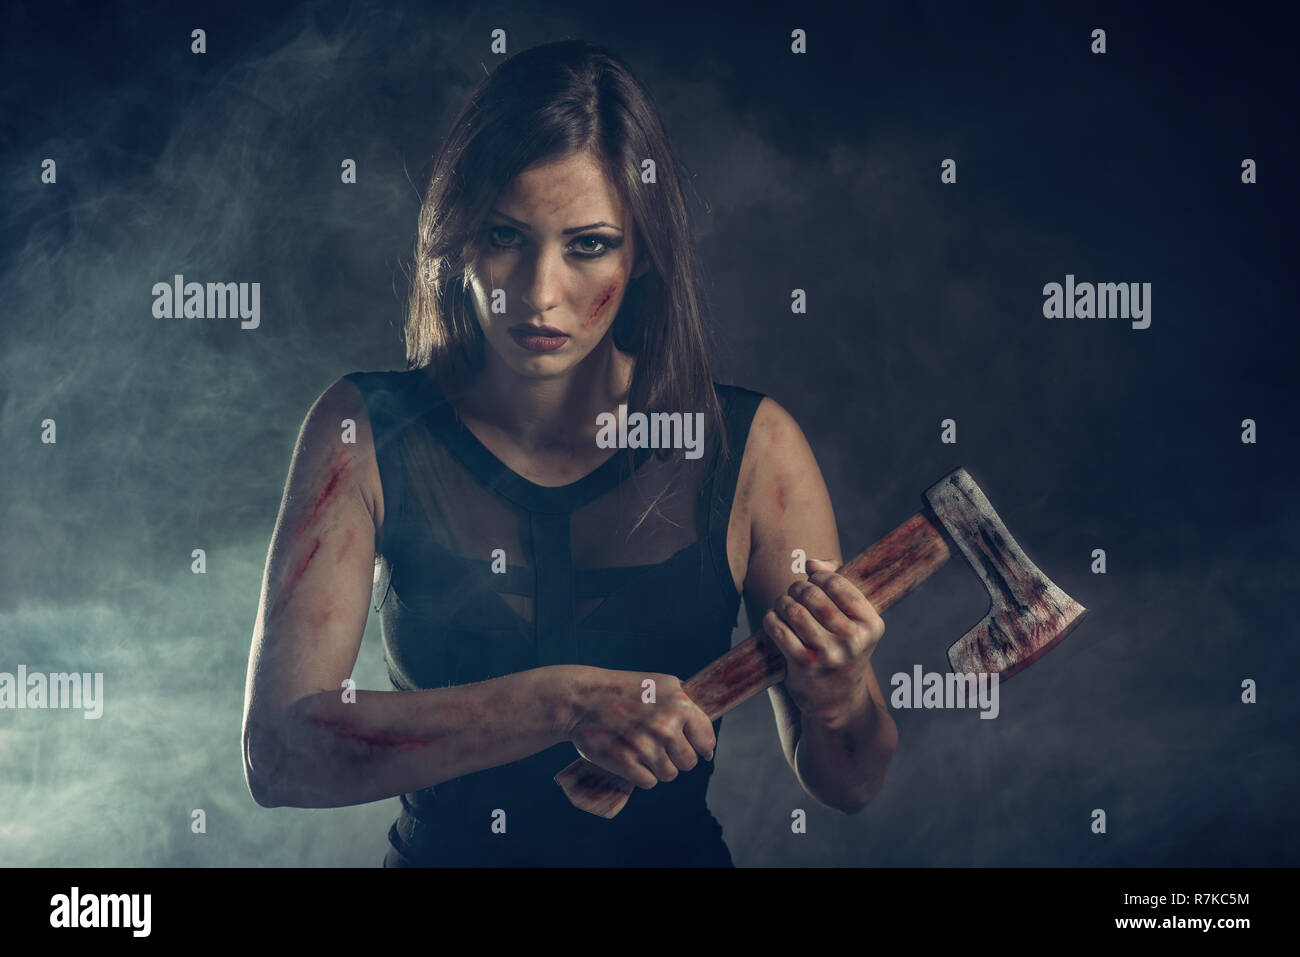 Beautiful dangerous girl with rusty axe. Looking at camera. Stock Photo